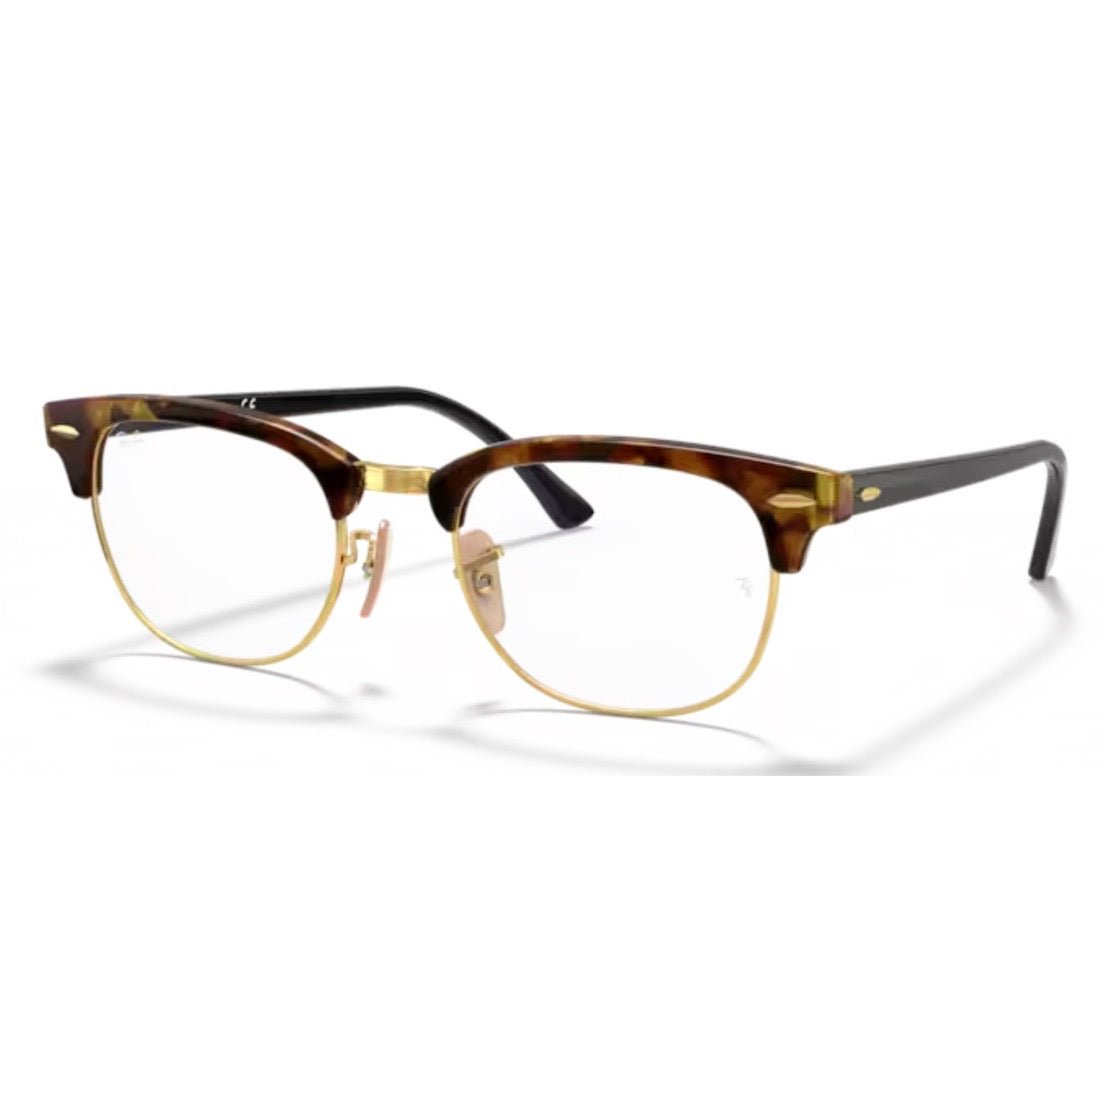 RAY-BAN - RX5154 5494 - Clubmaster - PARIS LUNETIER